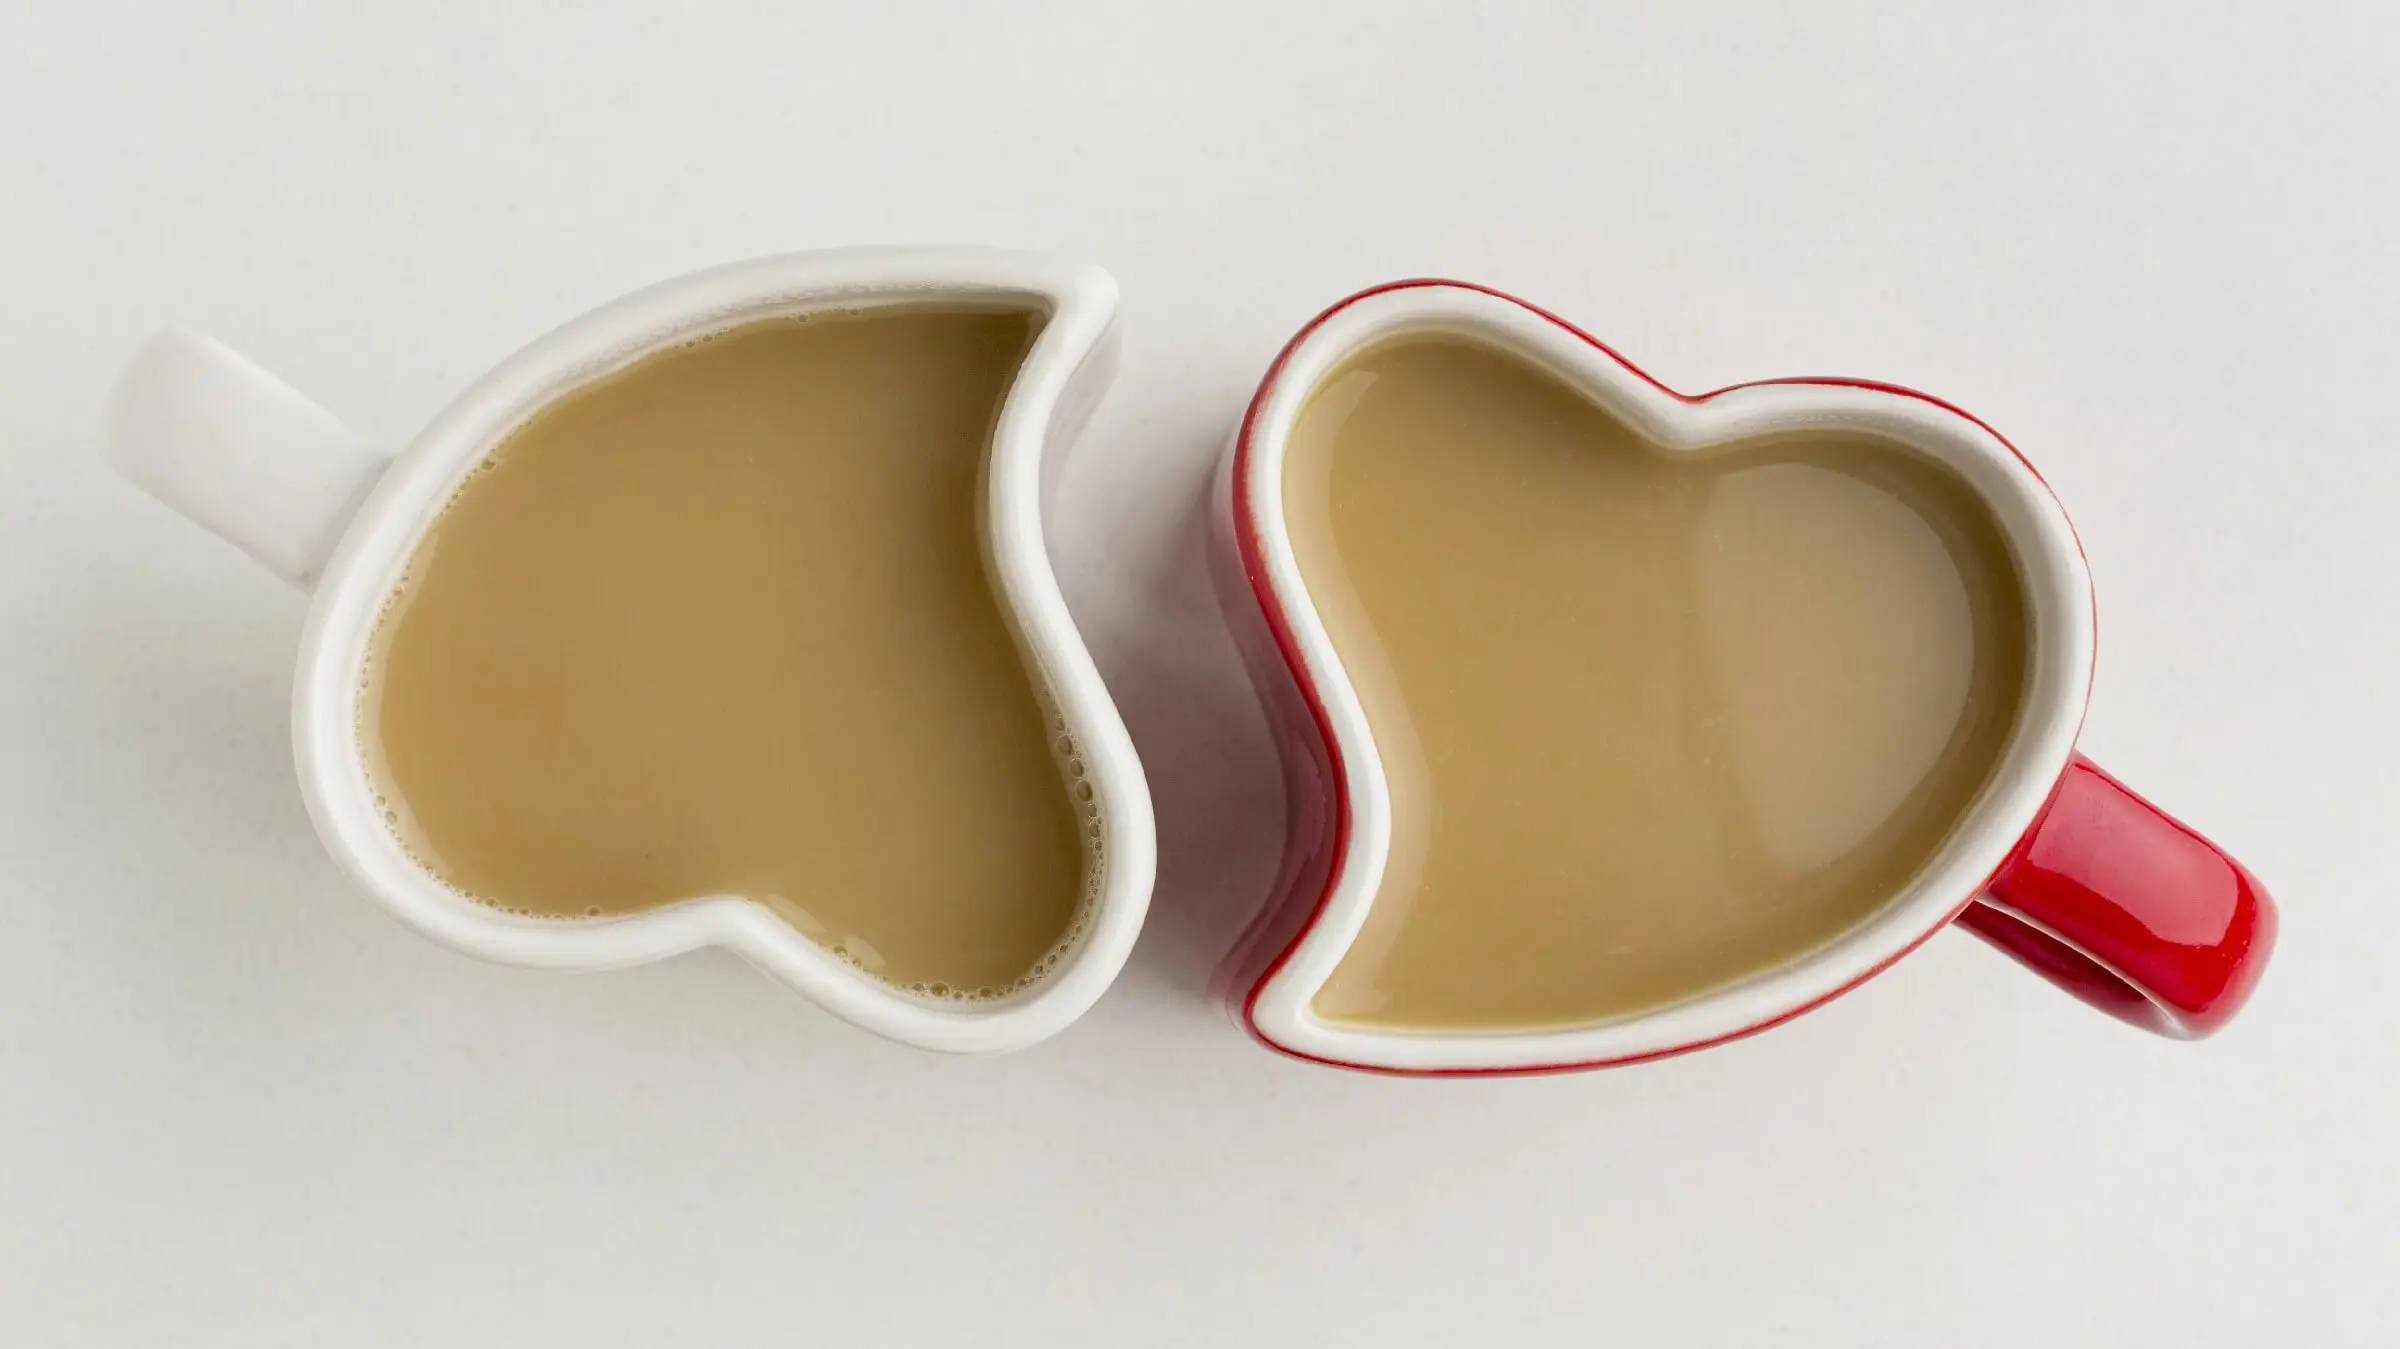 Heart coffee mugs are perfect valentine's decoration for office